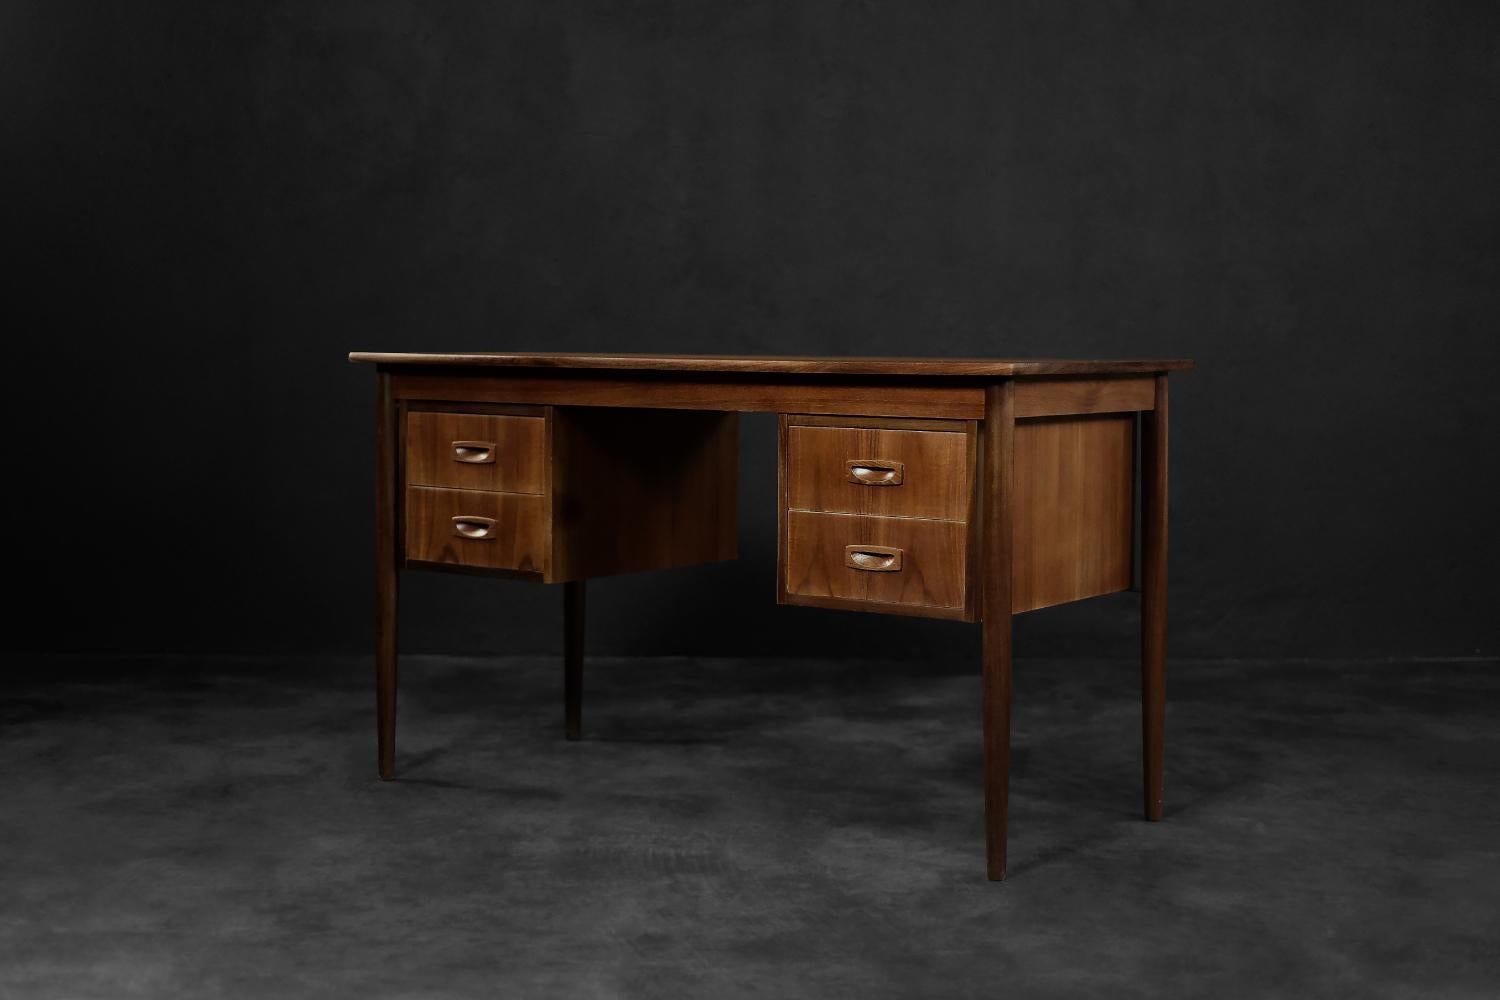 Mid-20th Century Vintage Mid-Century Classic Scandinavian Modern Teak Wood Desk with Drawers For Sale